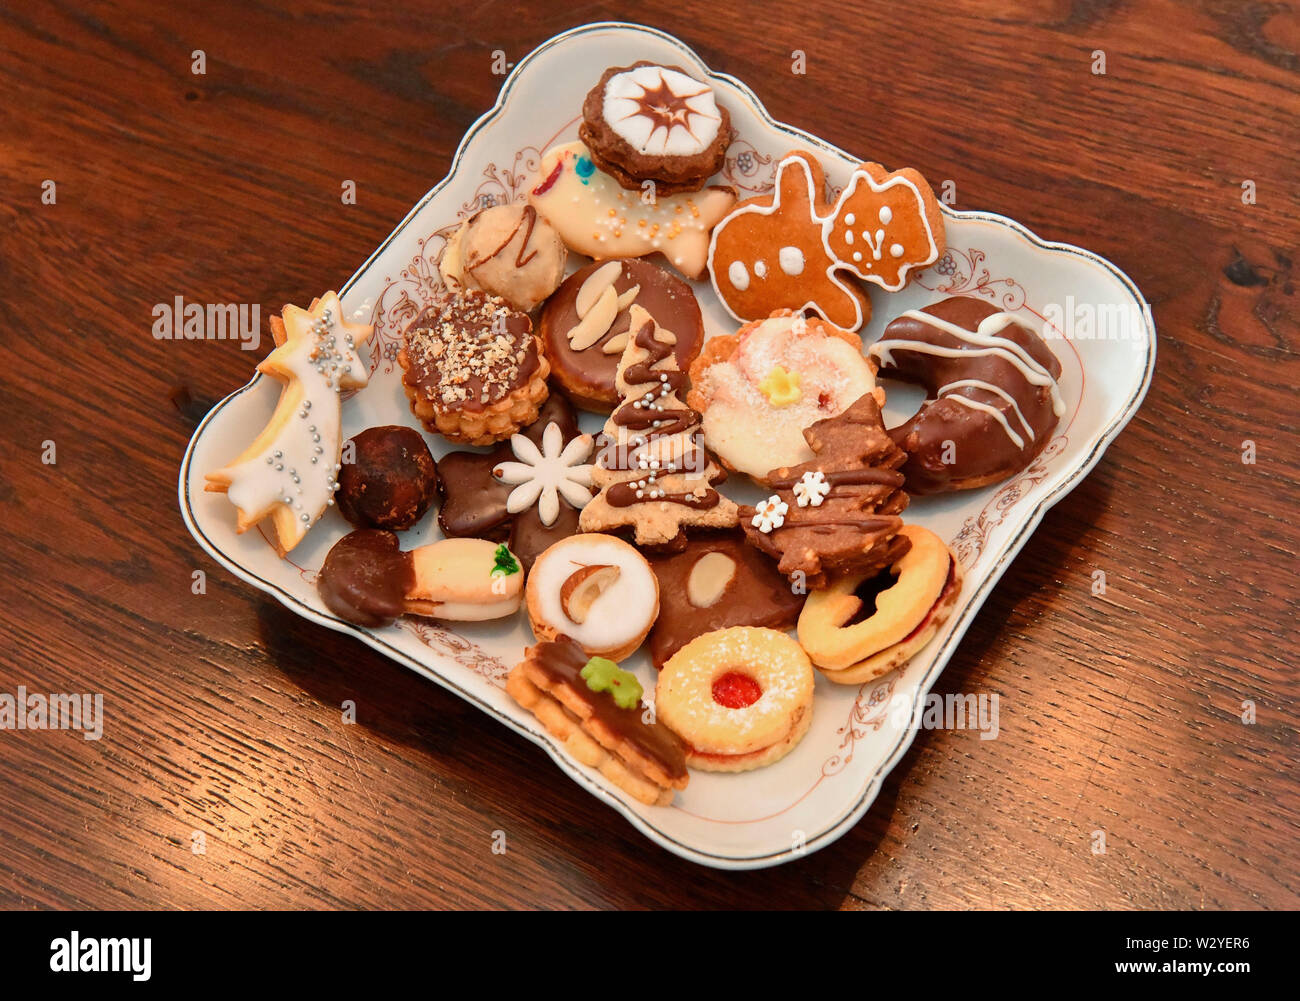 Bowl with Christmas cookies Stock Photo